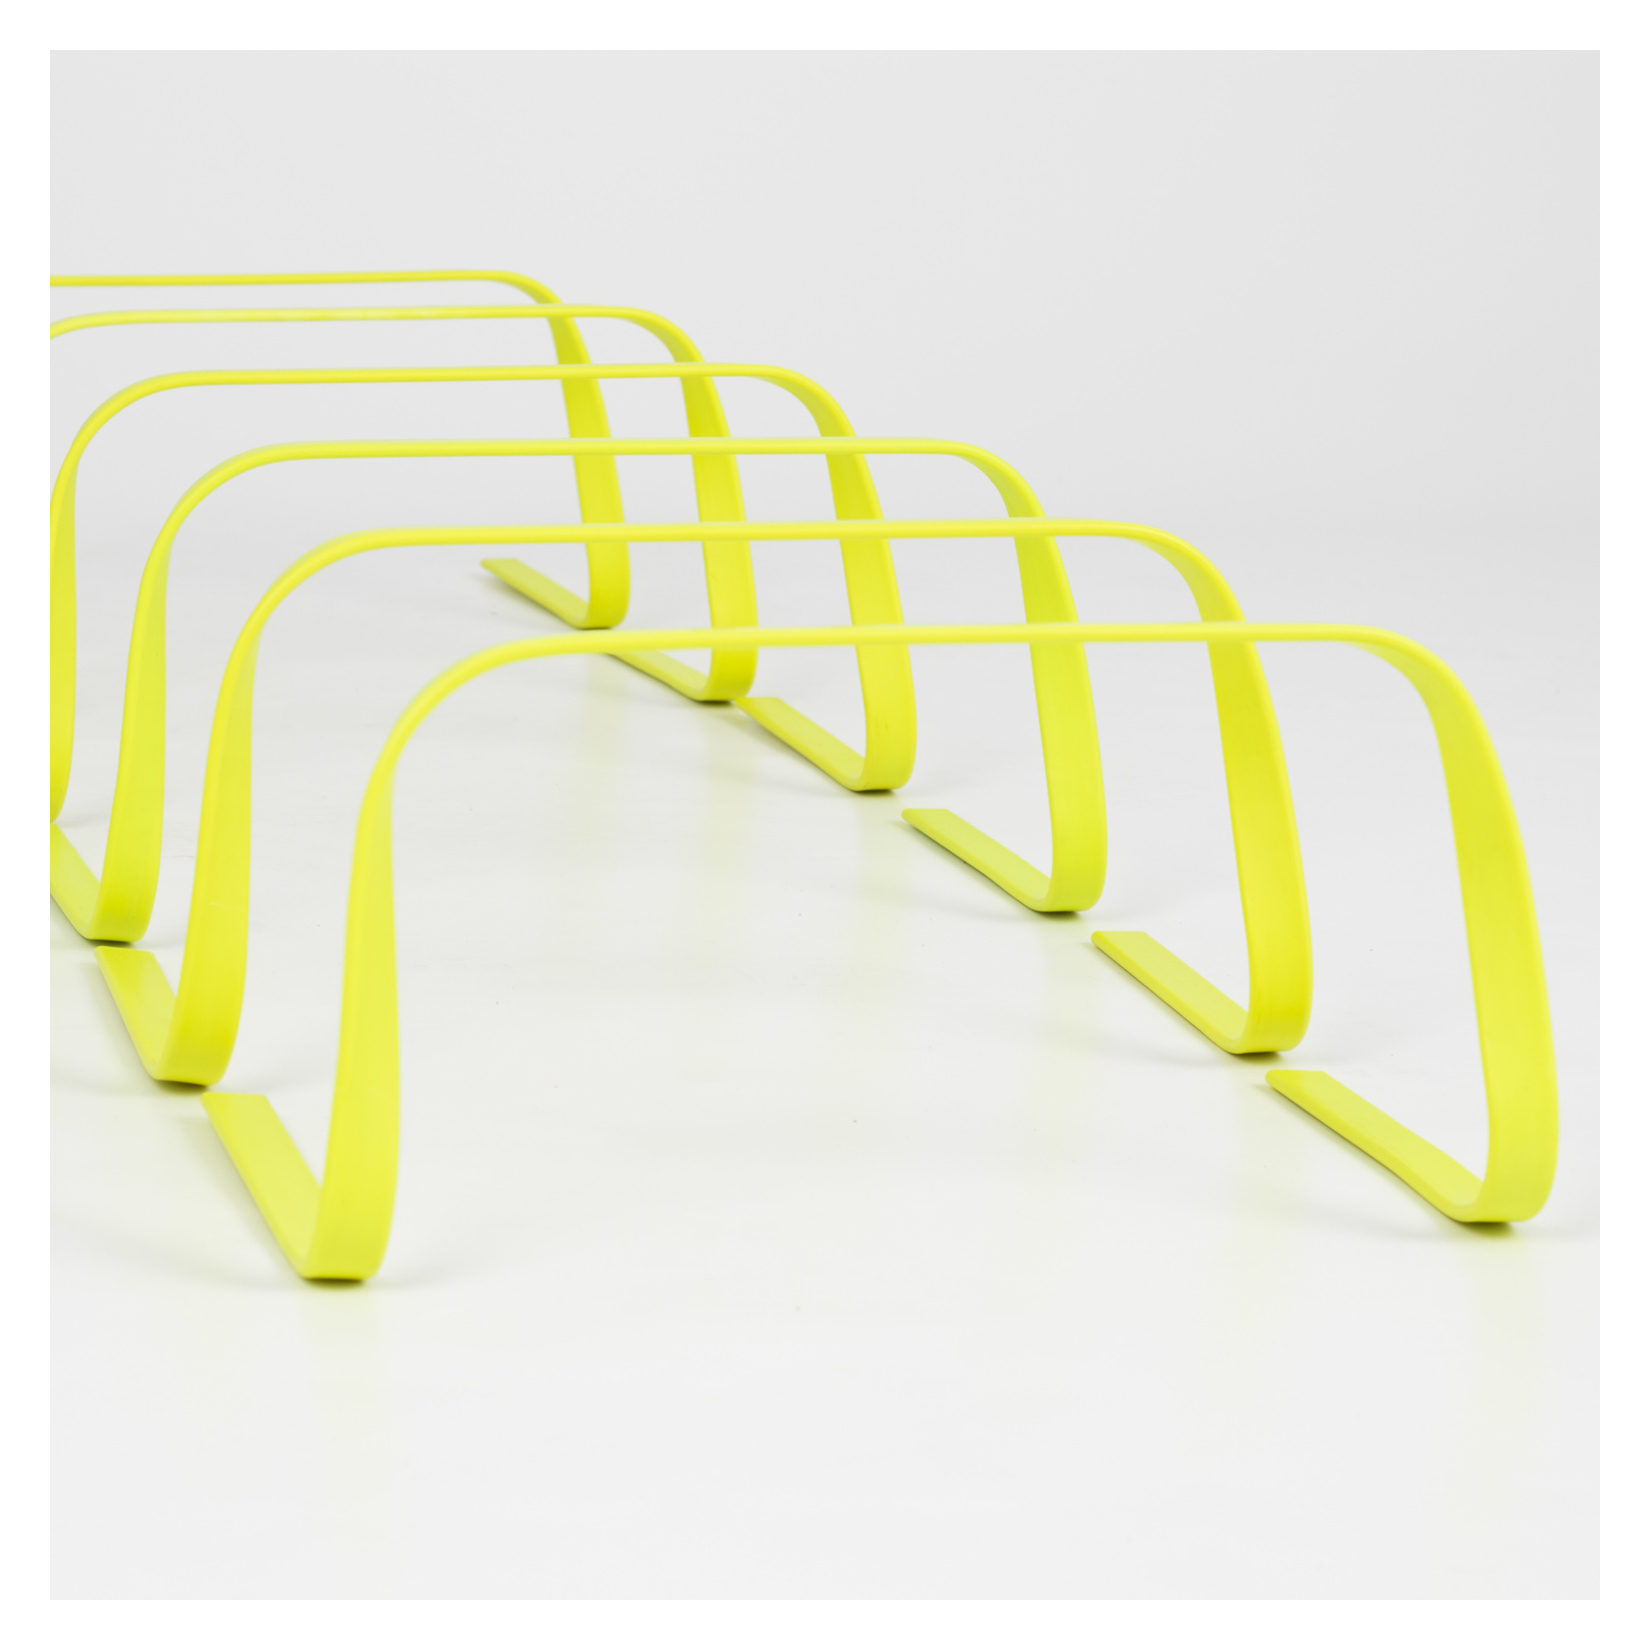 Super Agility 9'' Hurdles (Set of 6) with carry handle Fluo Yellow